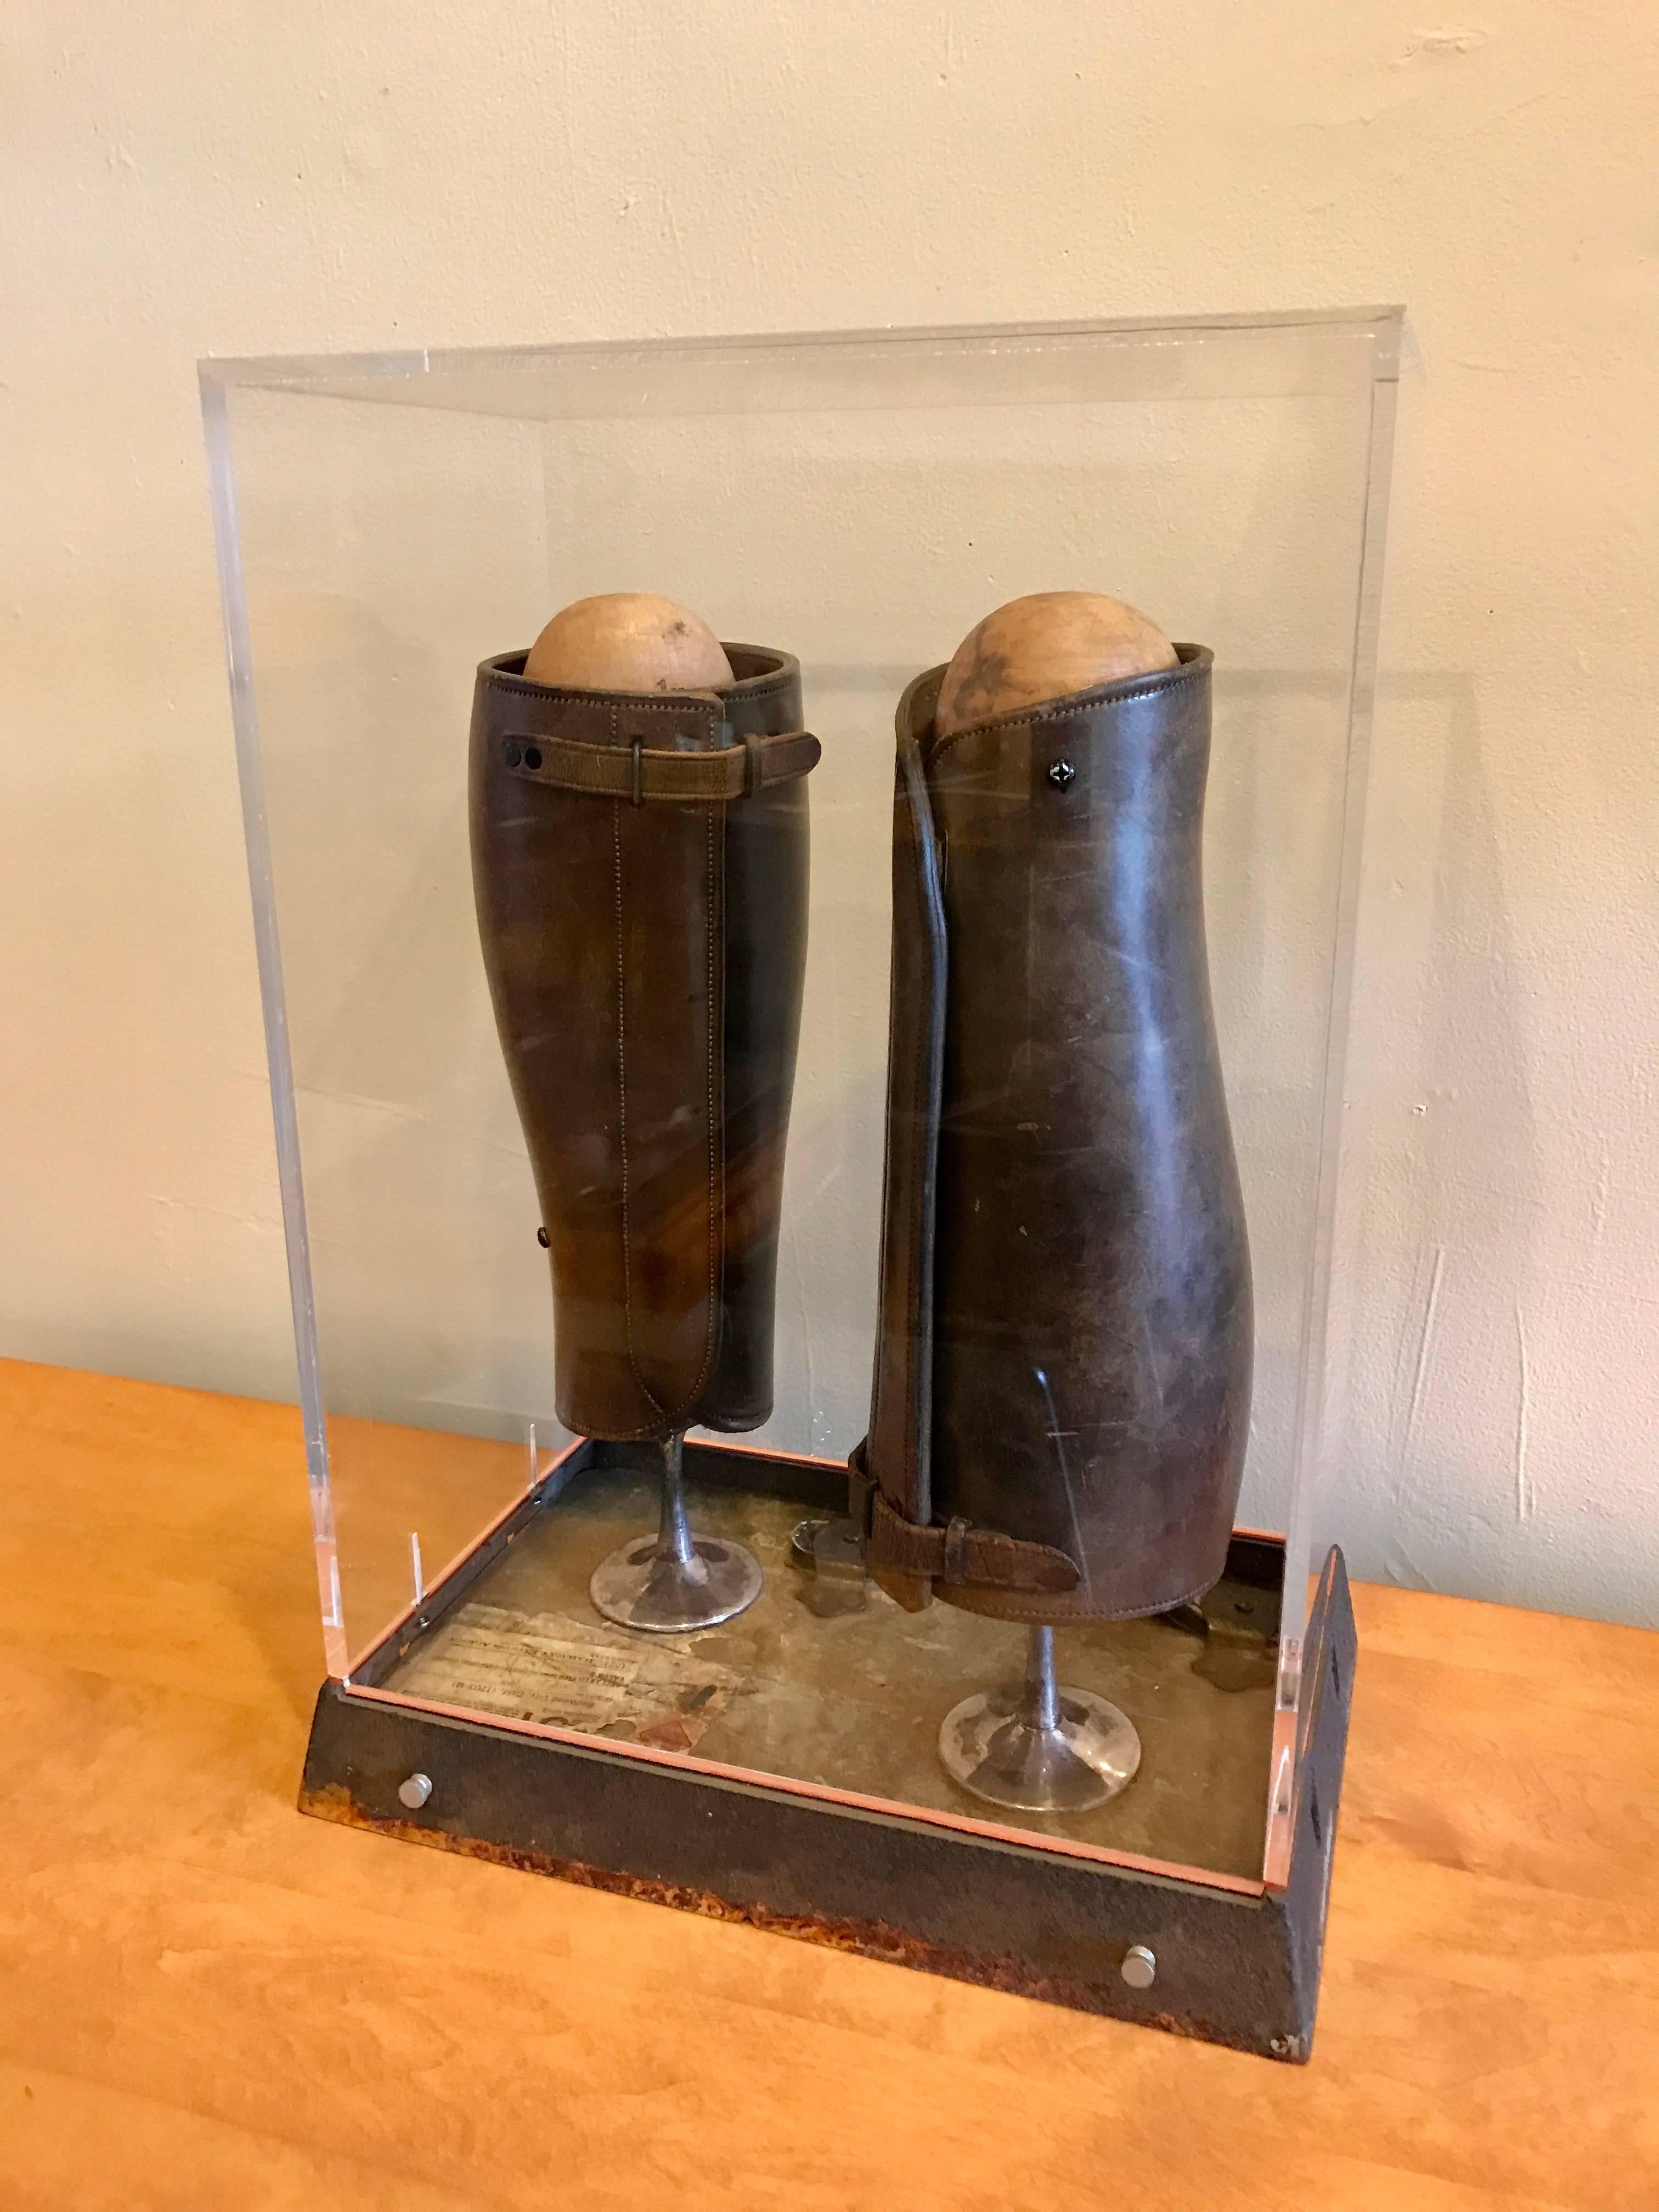 Mixed media abstract sculpture by Bay Area artist Scott Davis lll, this sculpture is titled "Twins" and was created in 1991, a mixture of leather, wood, paper and metal parts enclosed in an acrylic case, signed and dated. Davis's has had